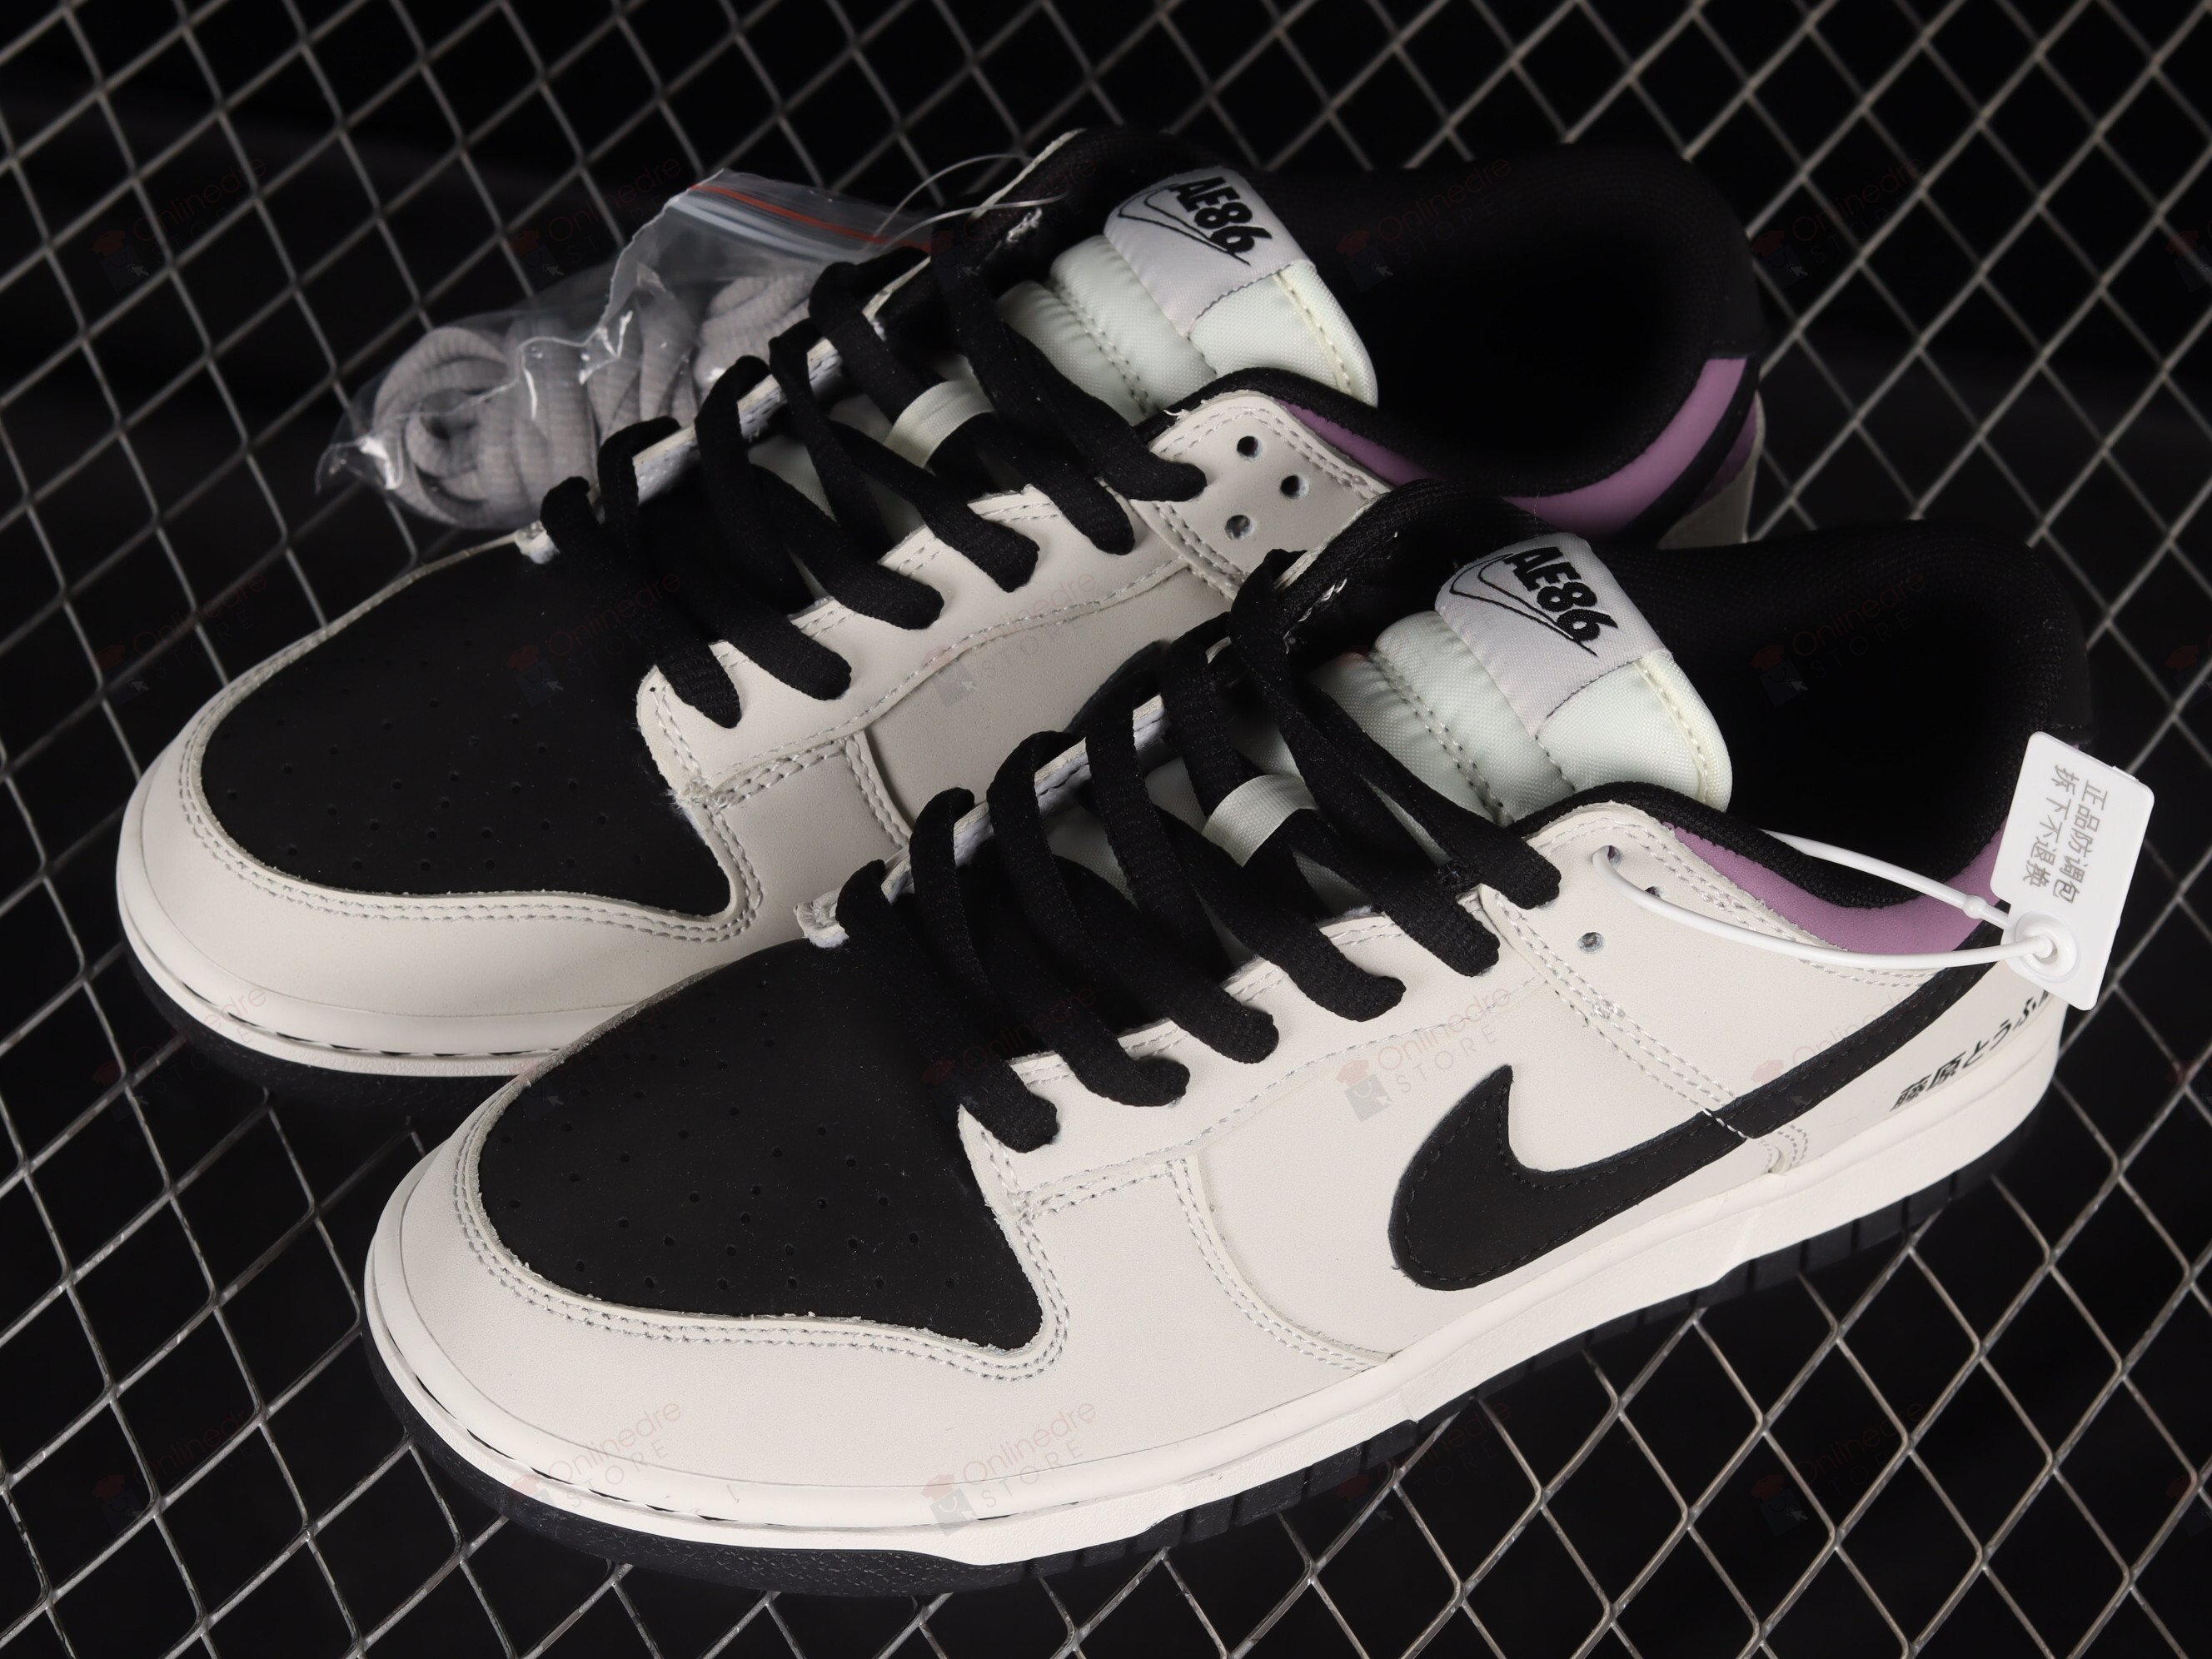 Nike SB Dunk Low Initial D/Toyota AE86 Shoes Sneakers - Online Dre